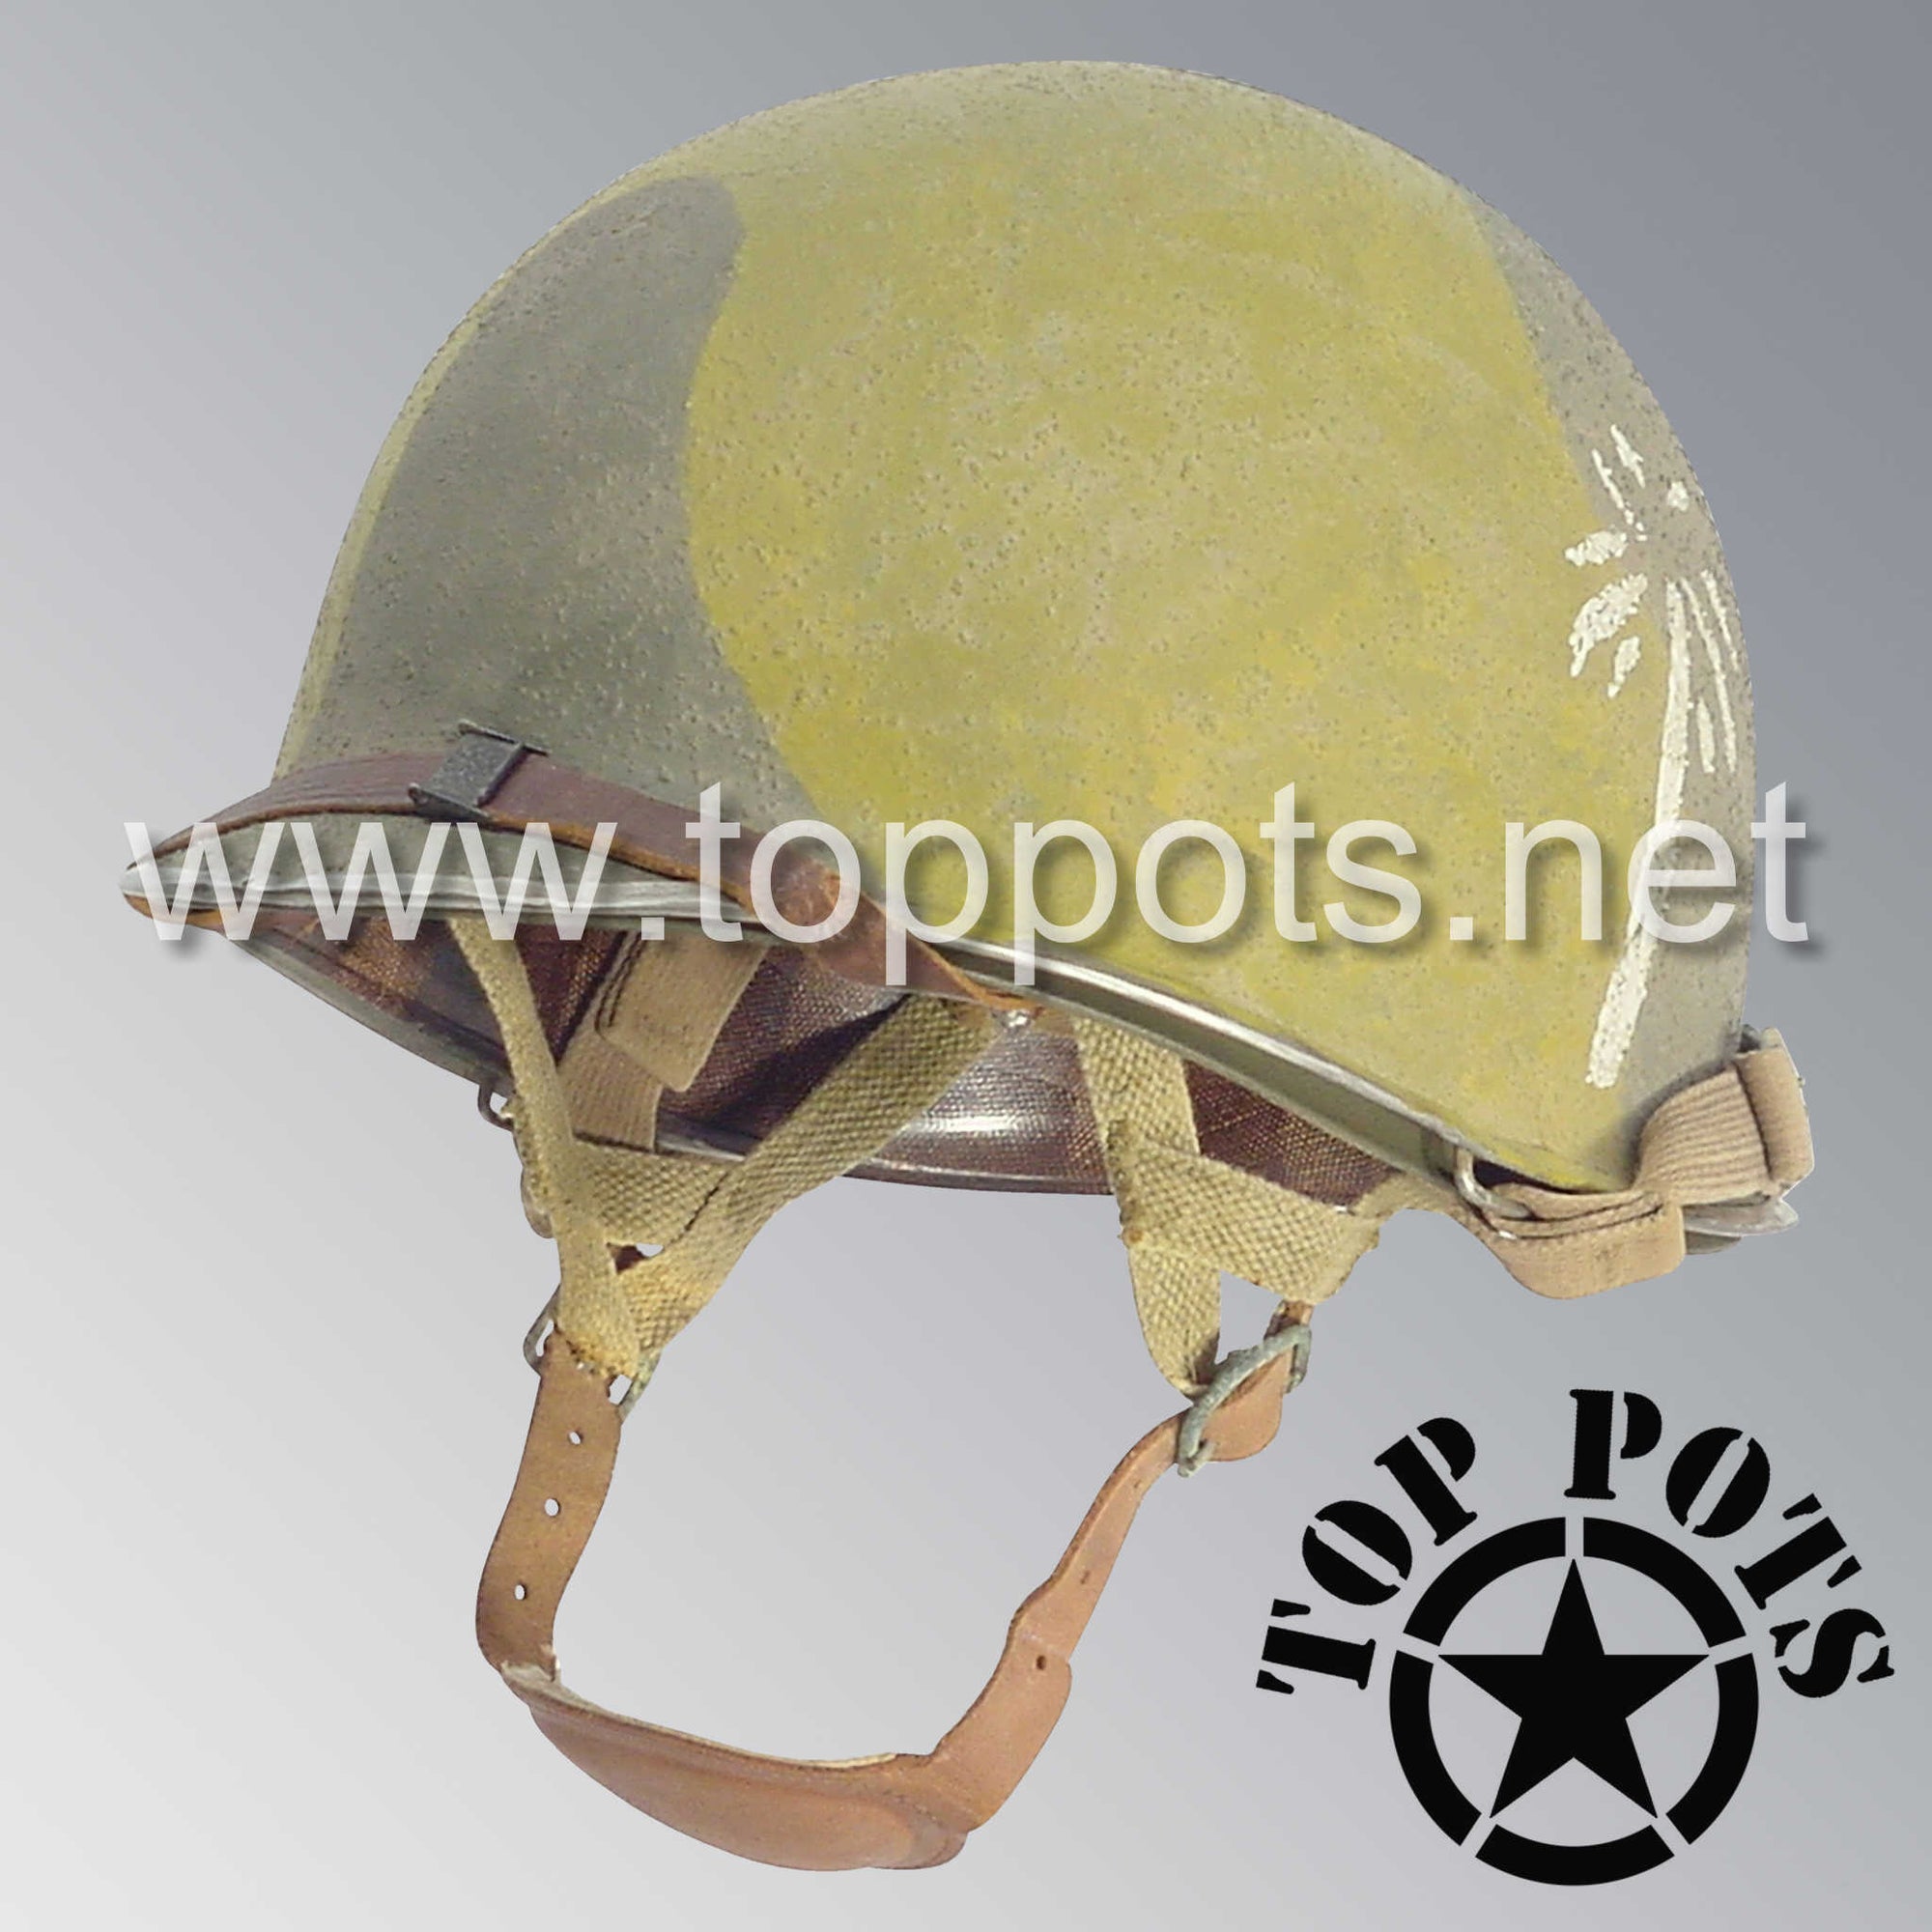 WWII US Army Aged Original M1C Paratrooper Airborne Helmet Fix Bale Shell and Liner with 551st PIR Pathfinder Camouflage Emblem